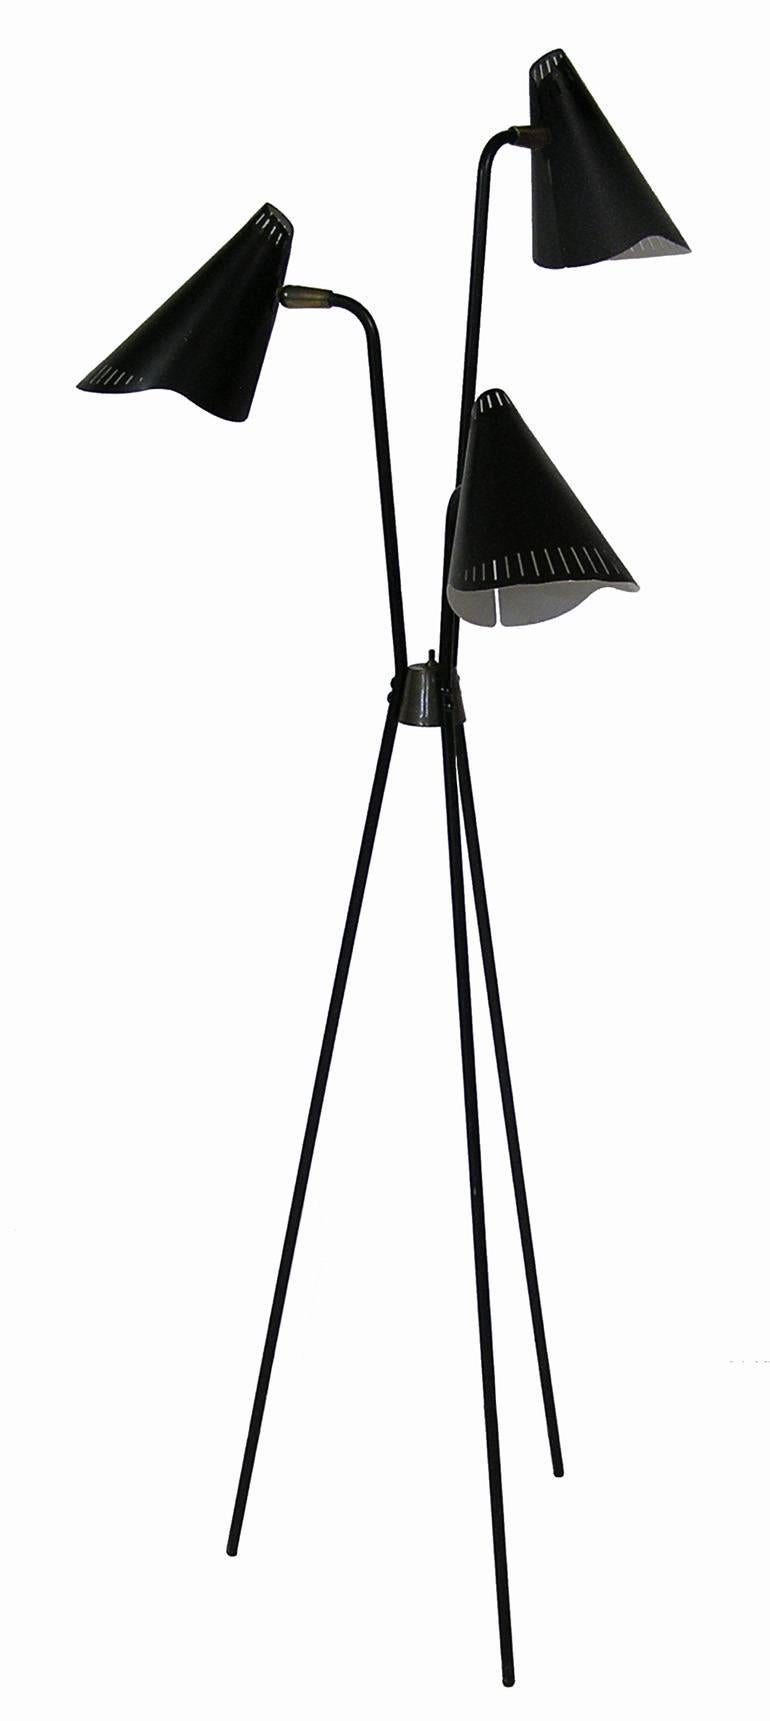 A rare 1950s tripod-leg floor lamp designed by Gerald Thurston for Lightolier. Lamp features three articulating lamp heads that can be lit up individually or simultaneously. This item is newly rewired including new sockets and cord. Overall